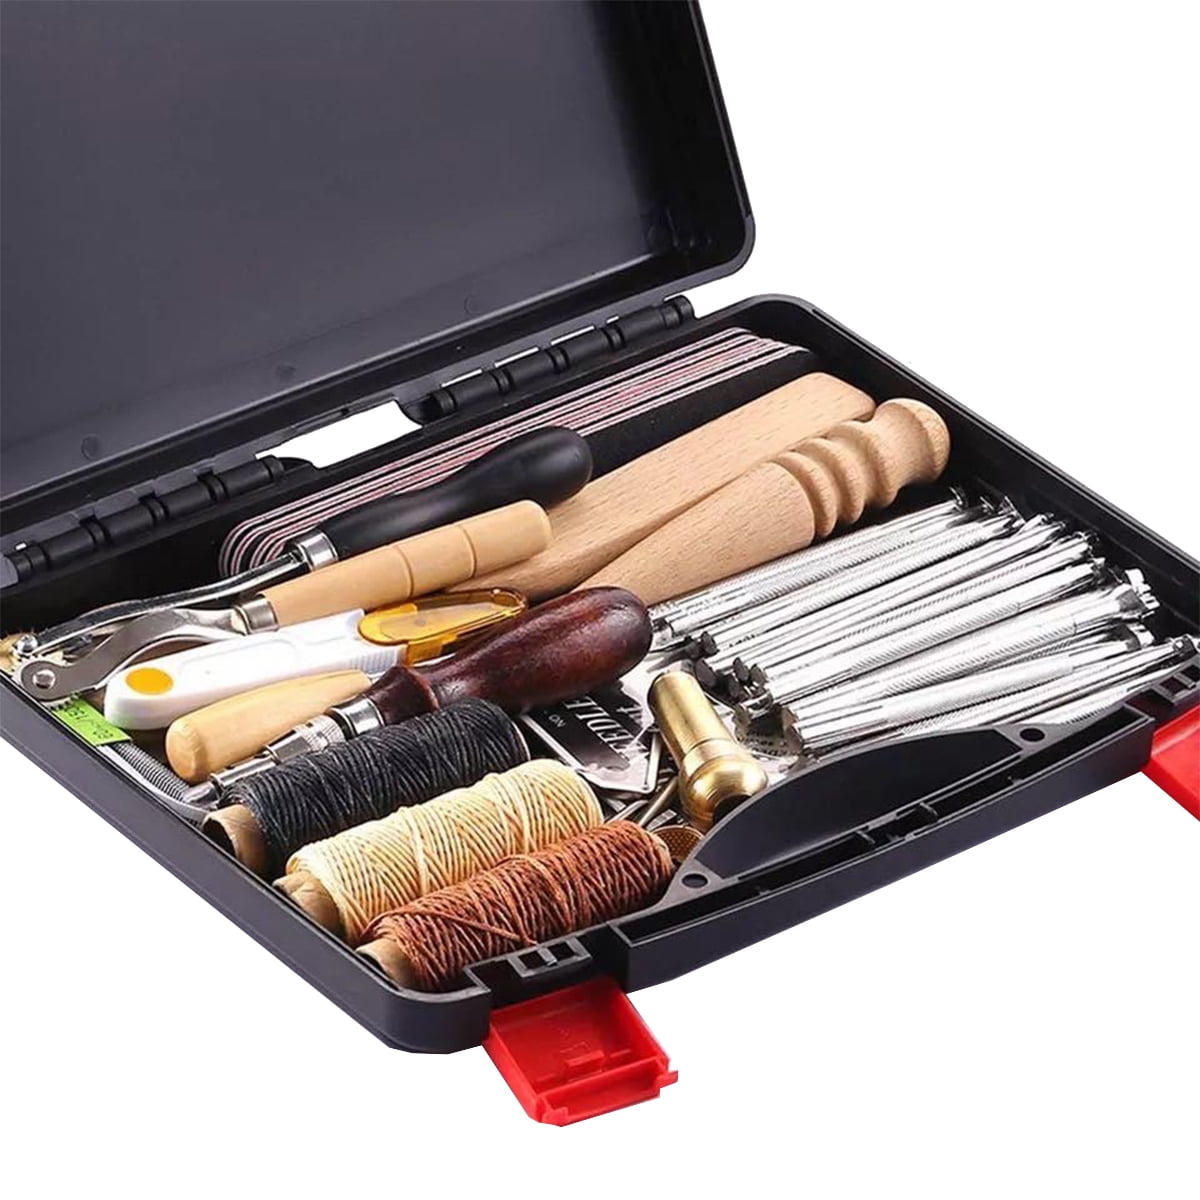 Leatherworking Tool Set with Needles Leathercraft Hand Tool Set for Diy  Faux Leather Working 14 Essential Tools for Stitching - AliExpress